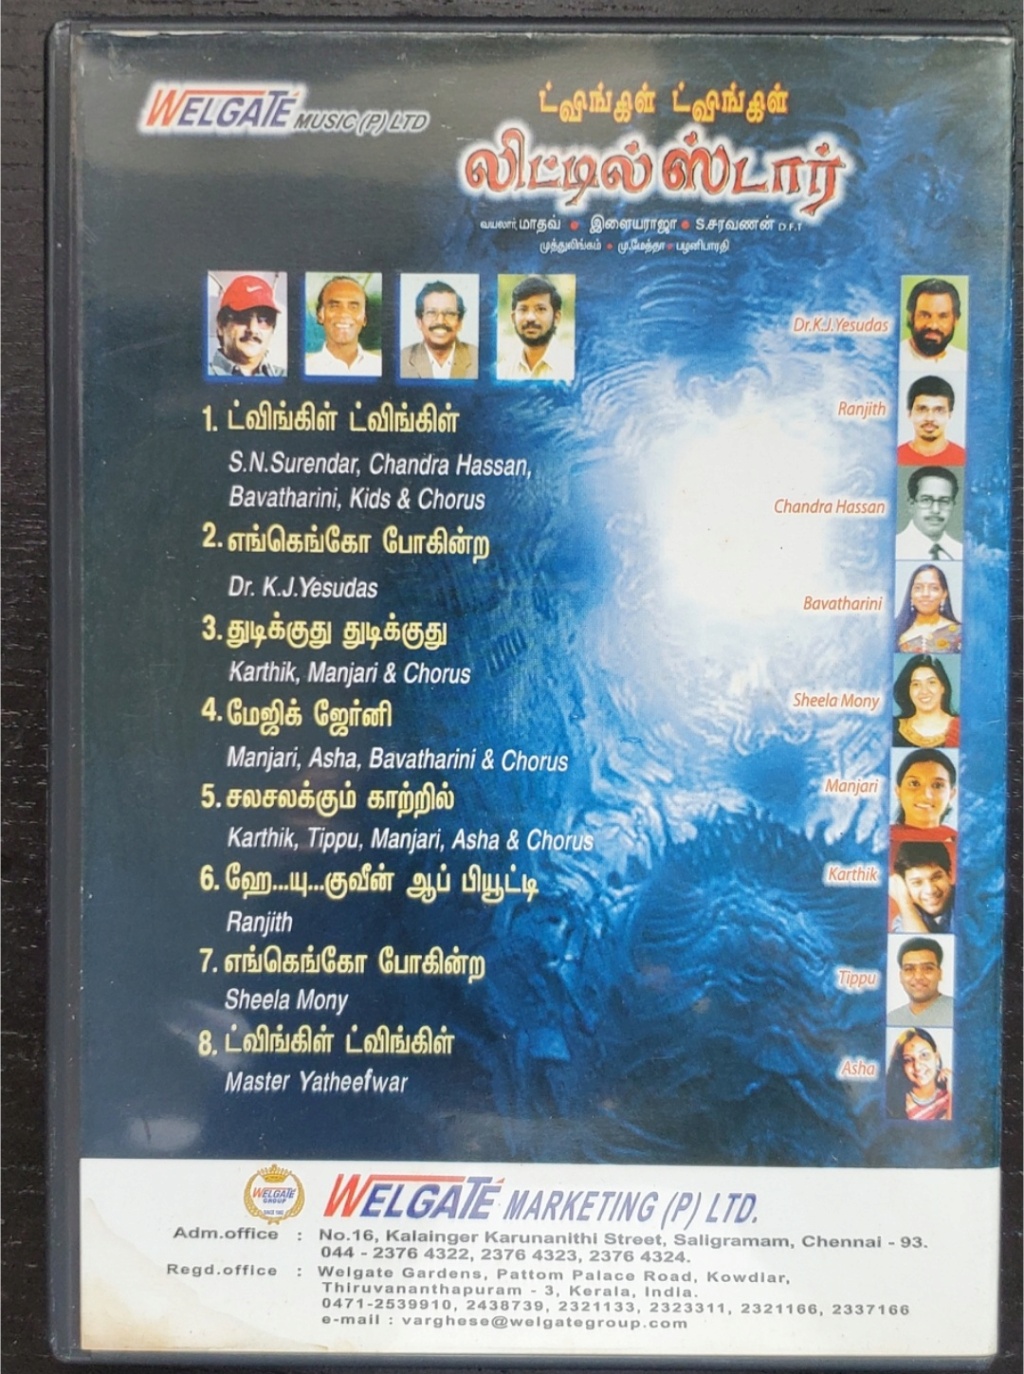 Vinyl ("LP" record) covers speak about IR (Pictures & Details) - Thamizh - Page 27 2005_t12